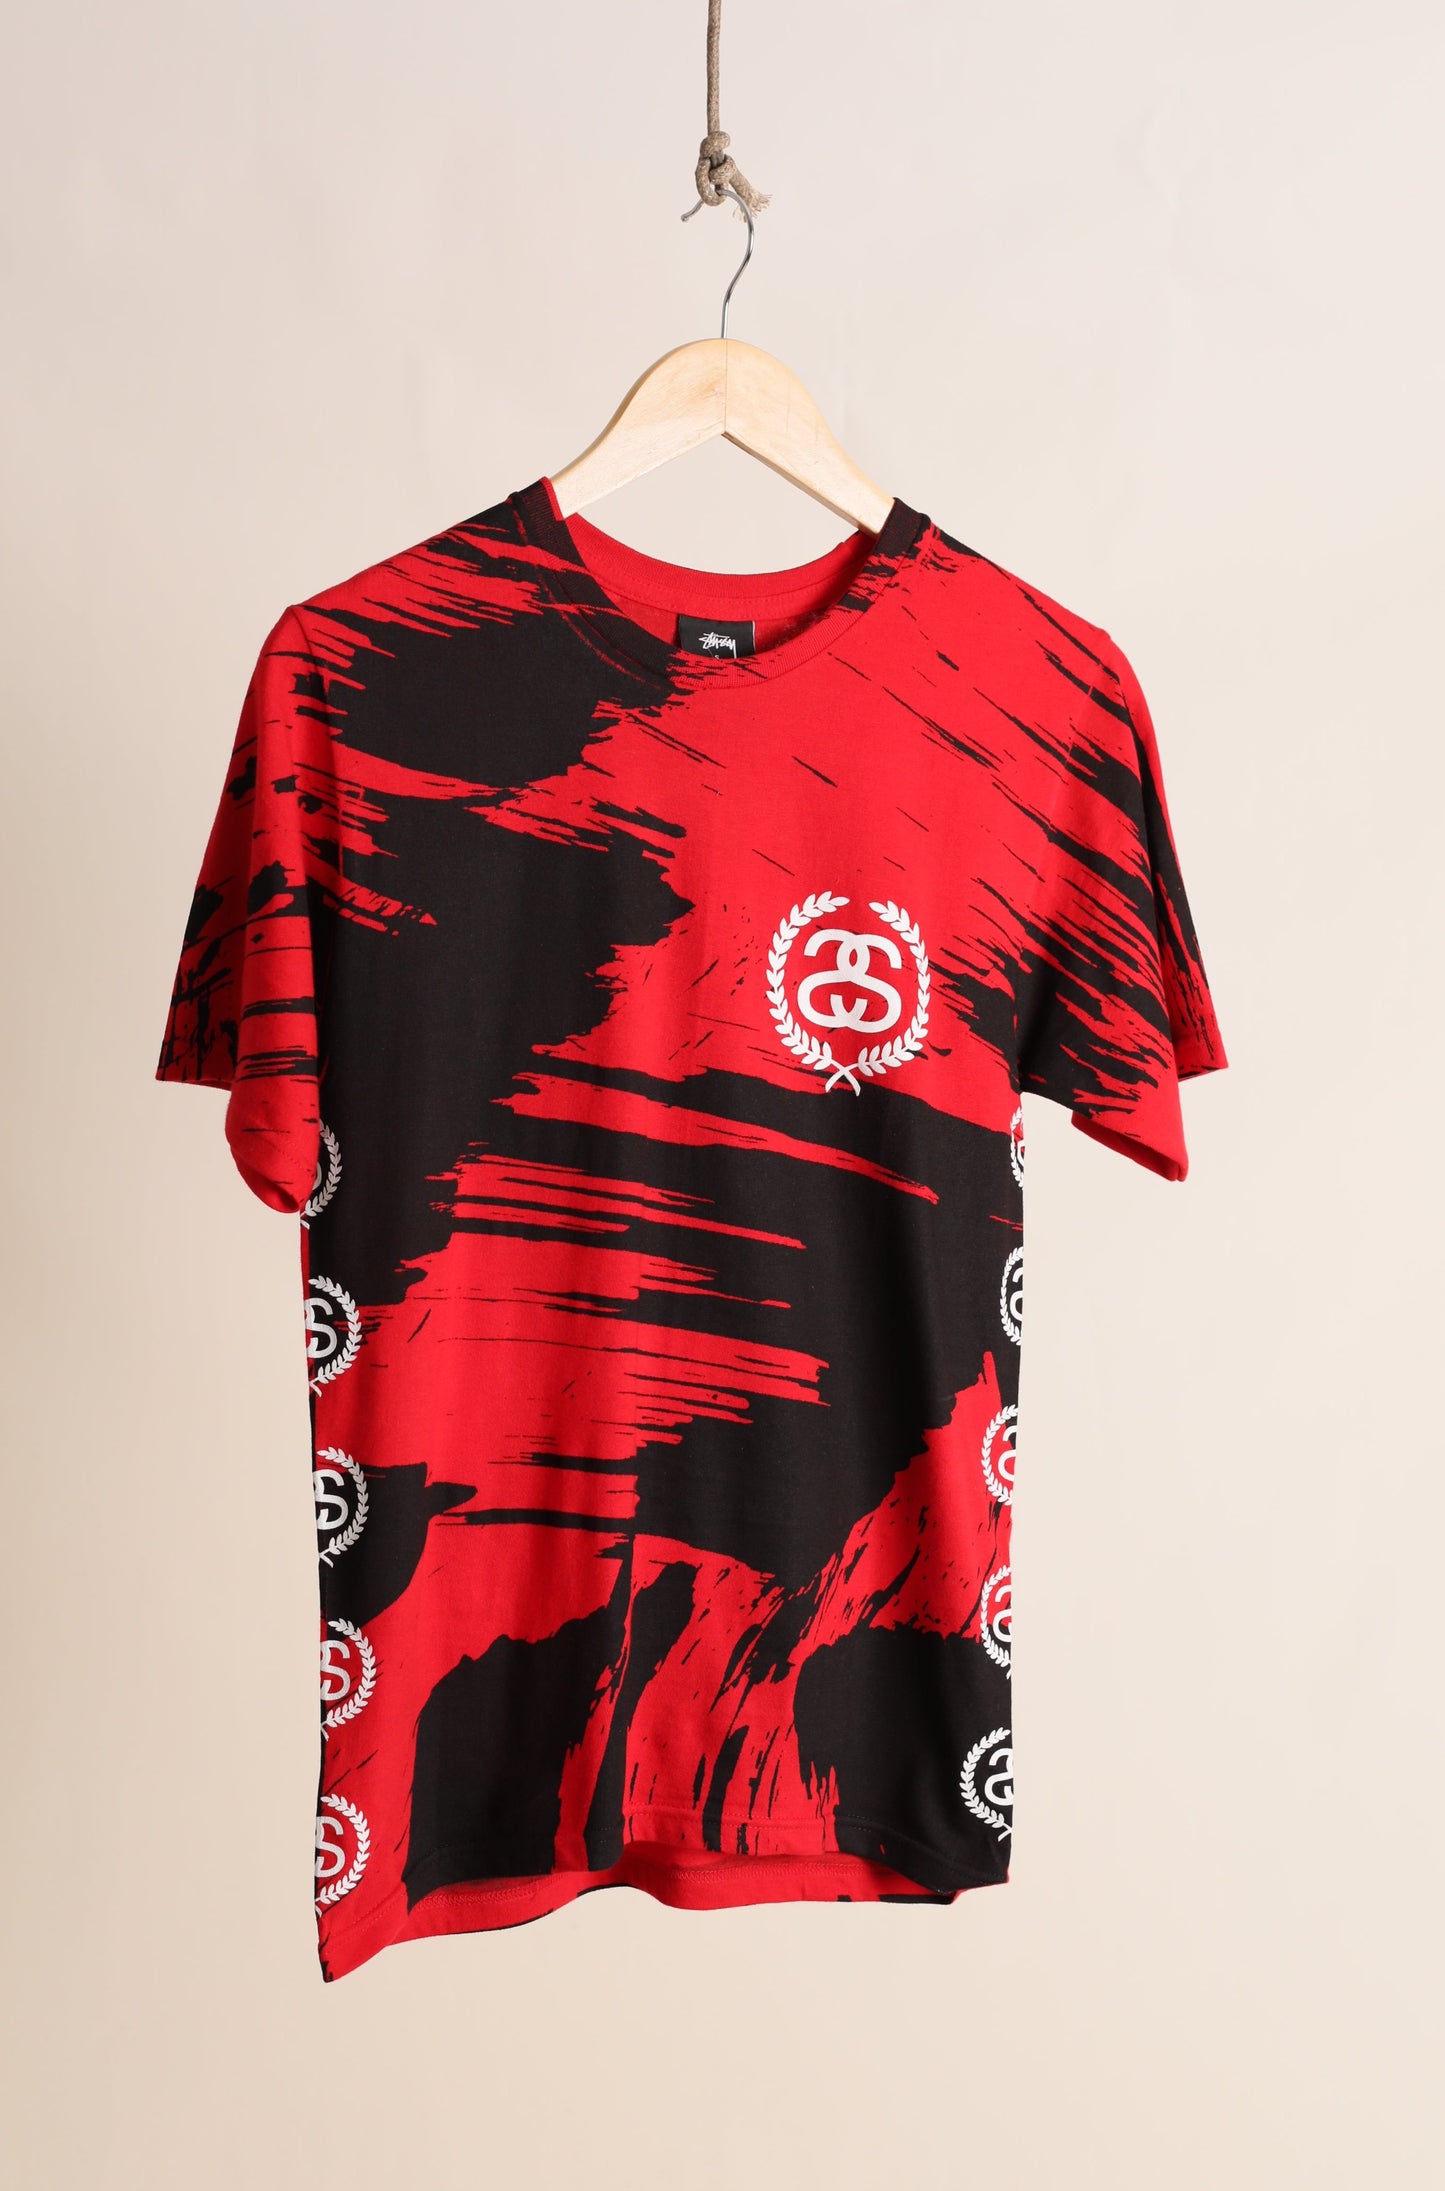 Deadstock Stussy painted black / red T-shirt (S)